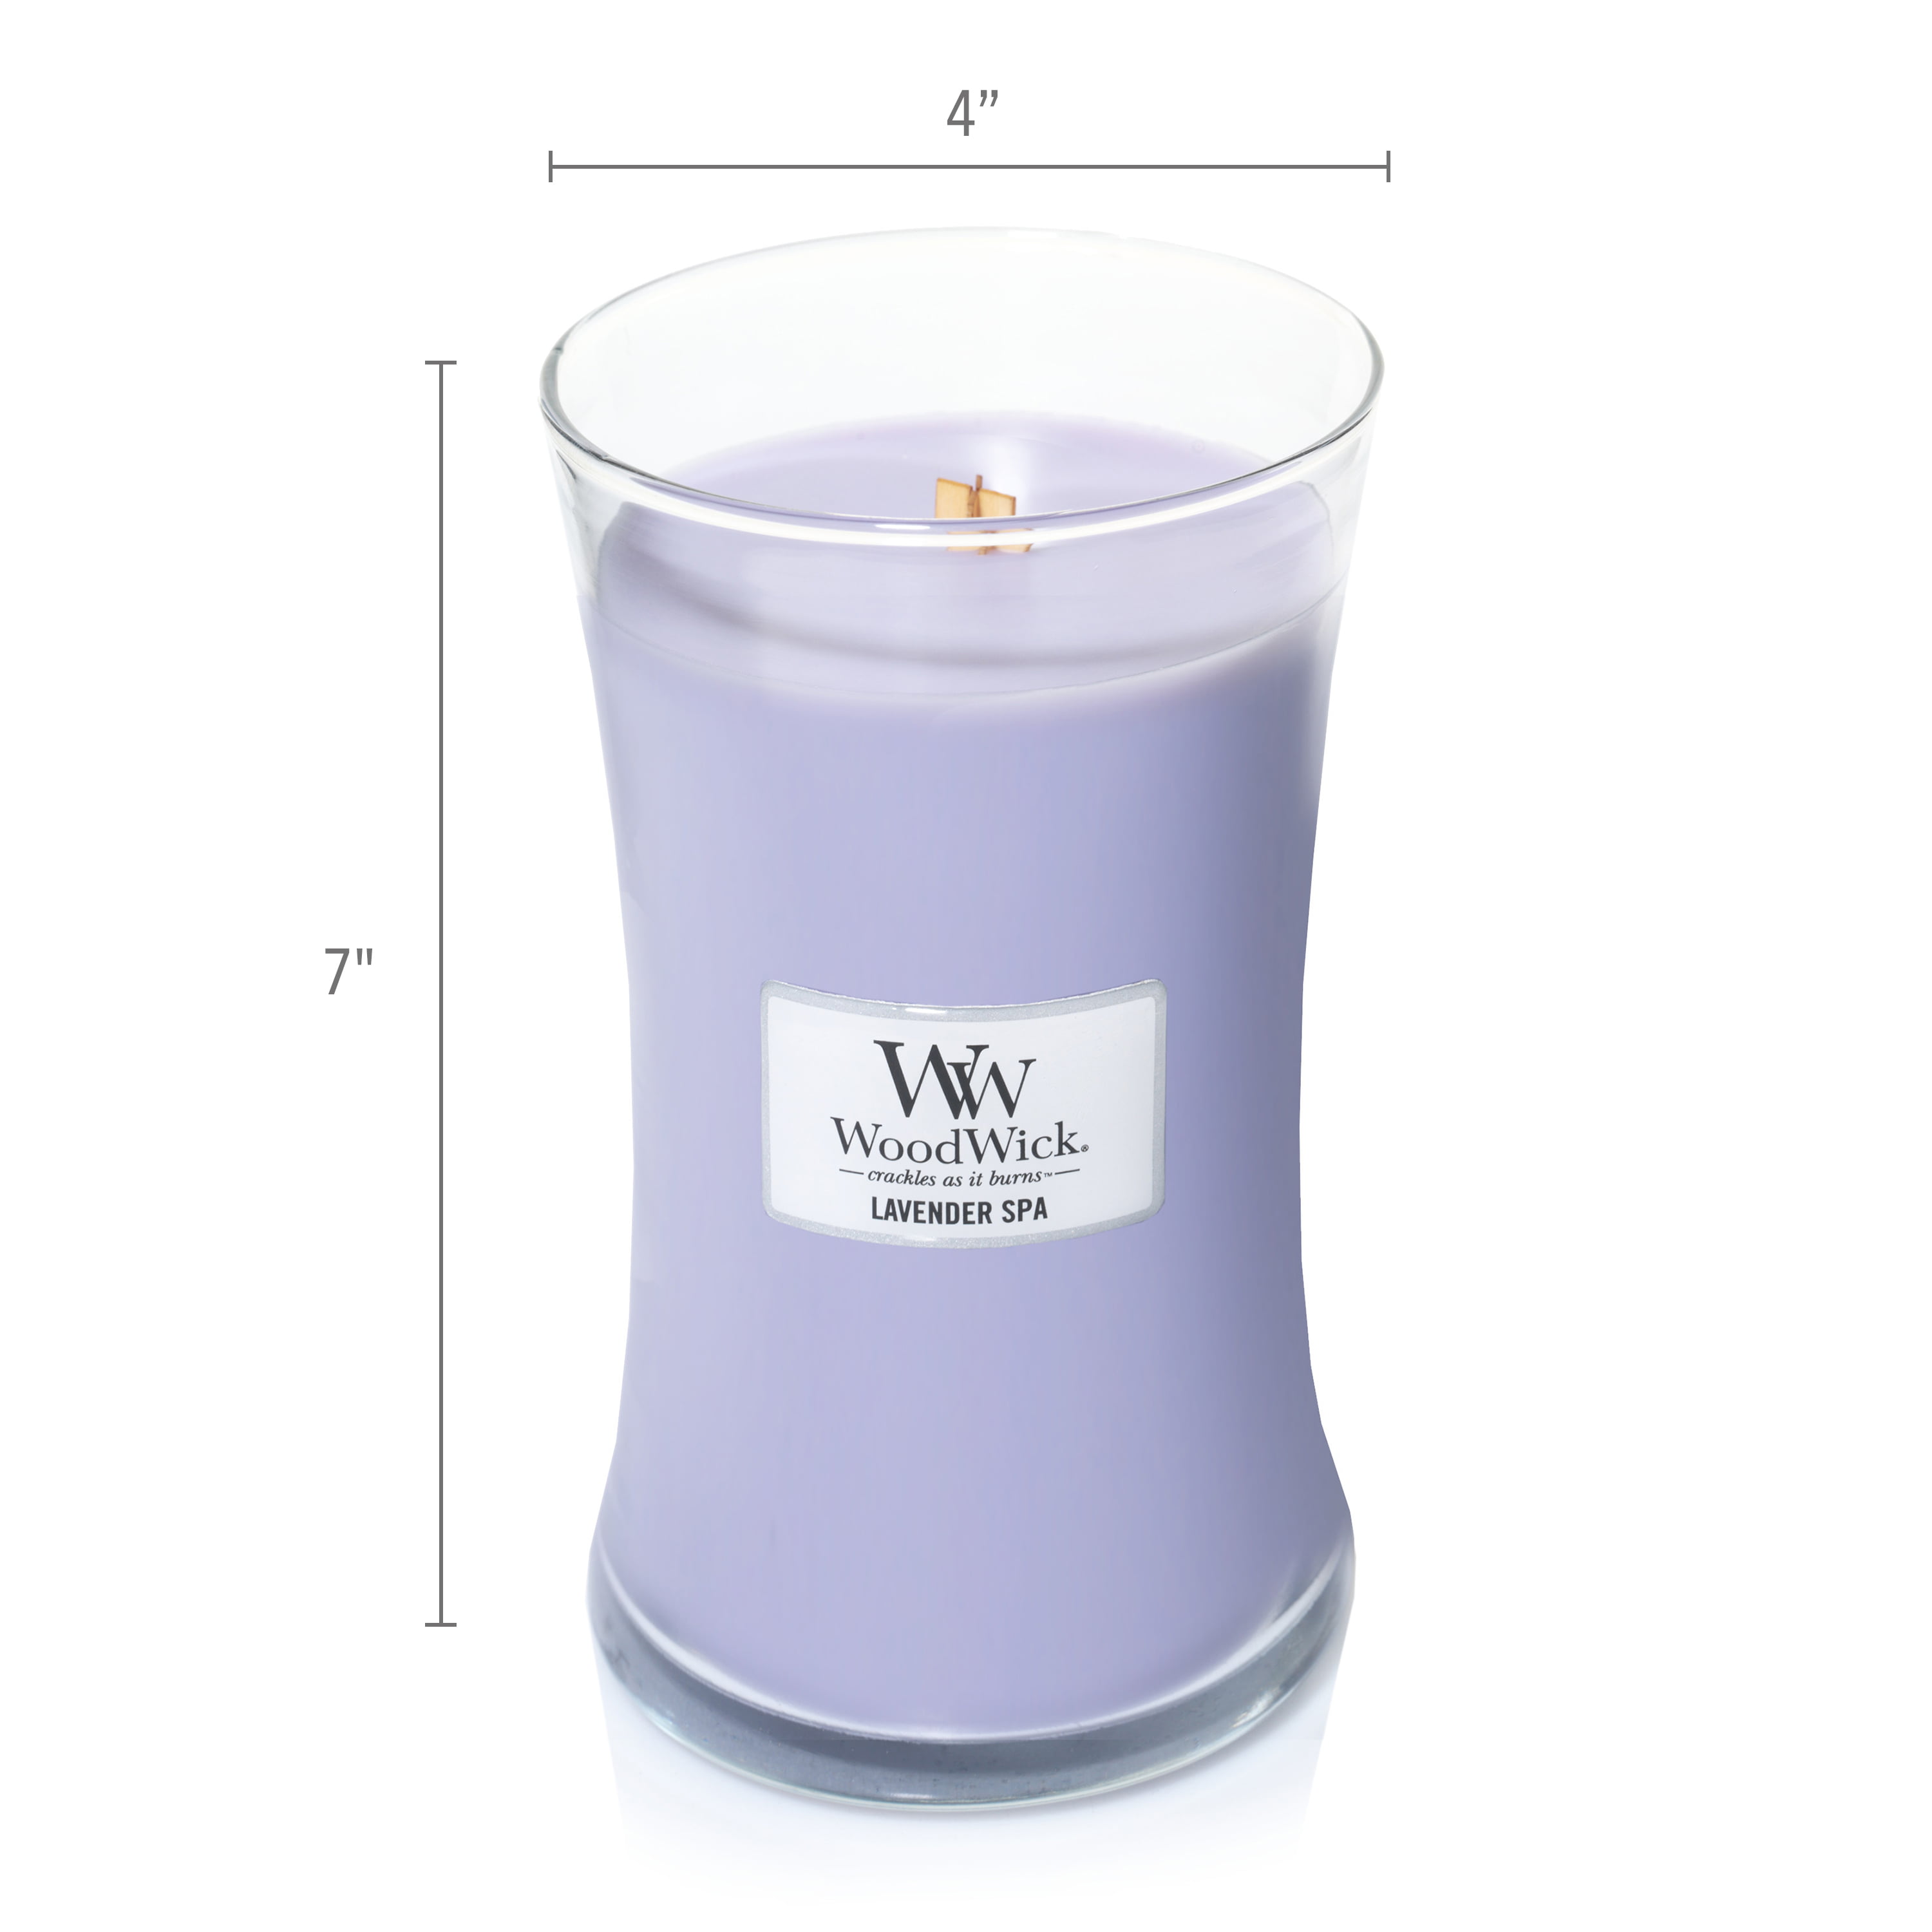 woodwick candles official site